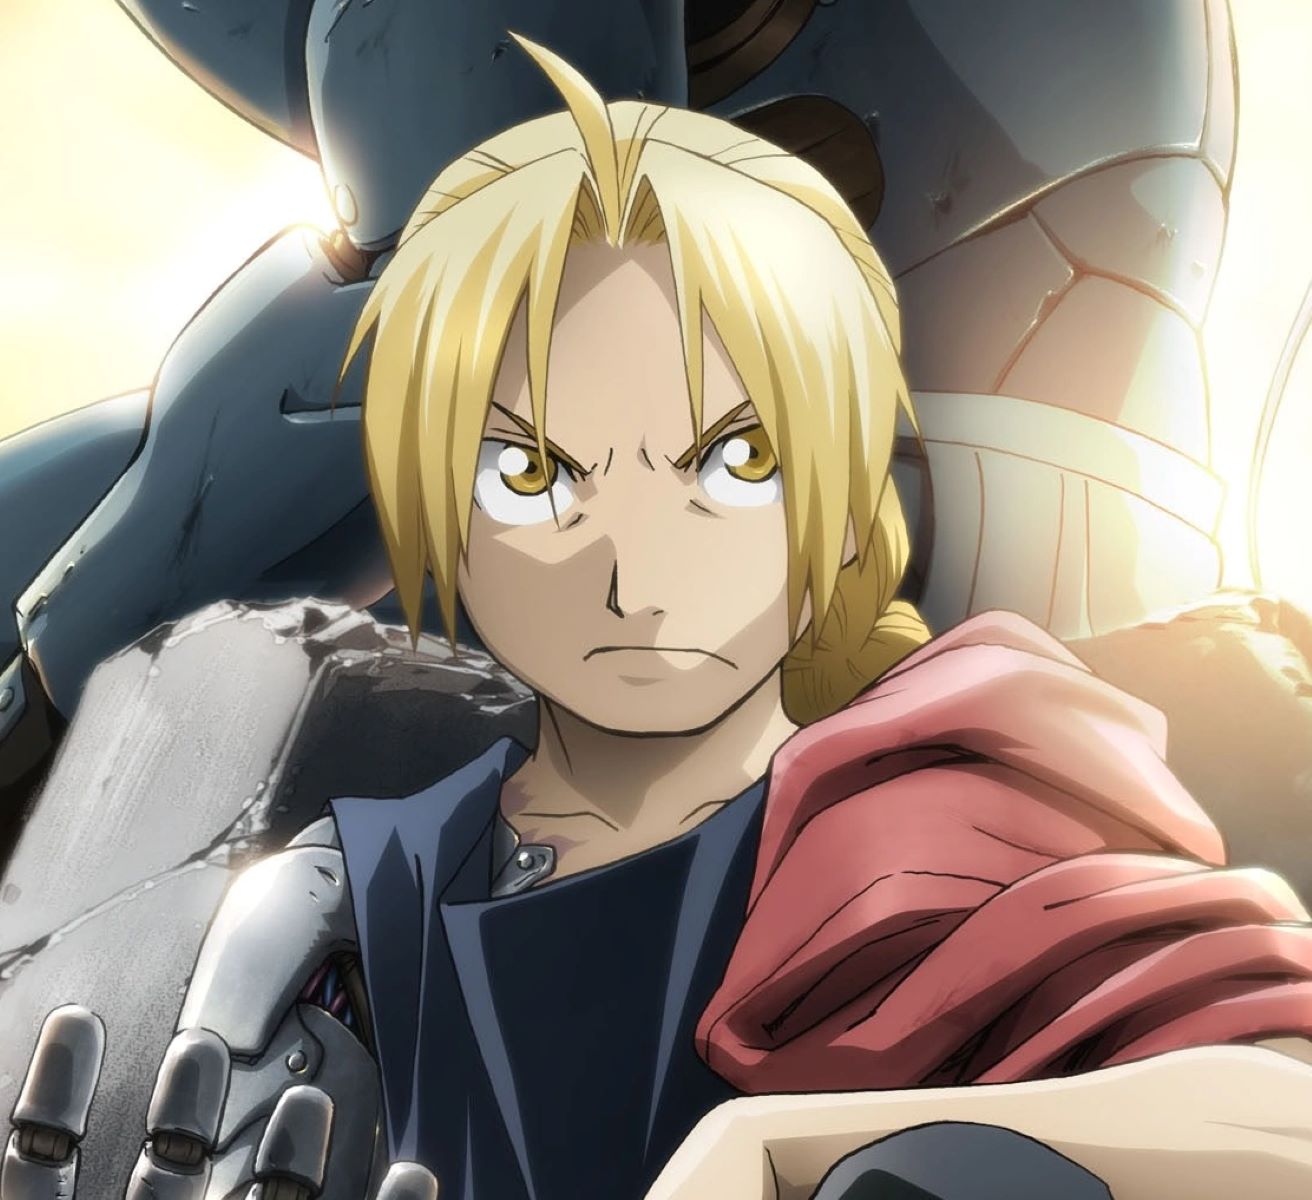 The Surprising Height Of Edward Elric In Fullmetal Alchemist Revealed!